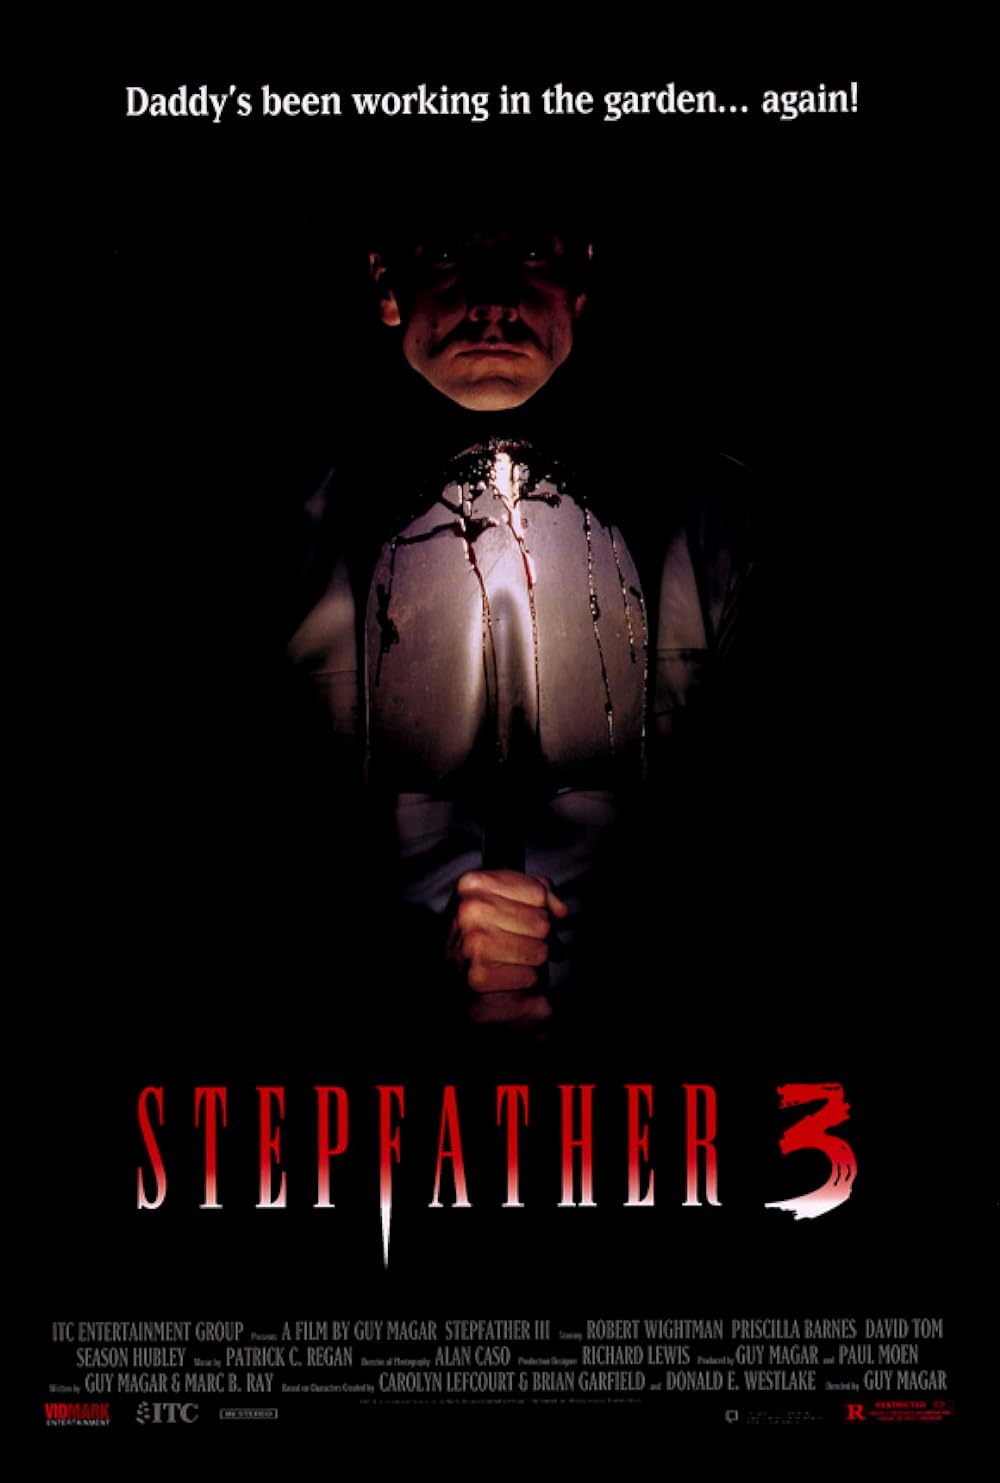 christopher soda recommends stepfather 3 full movie pic